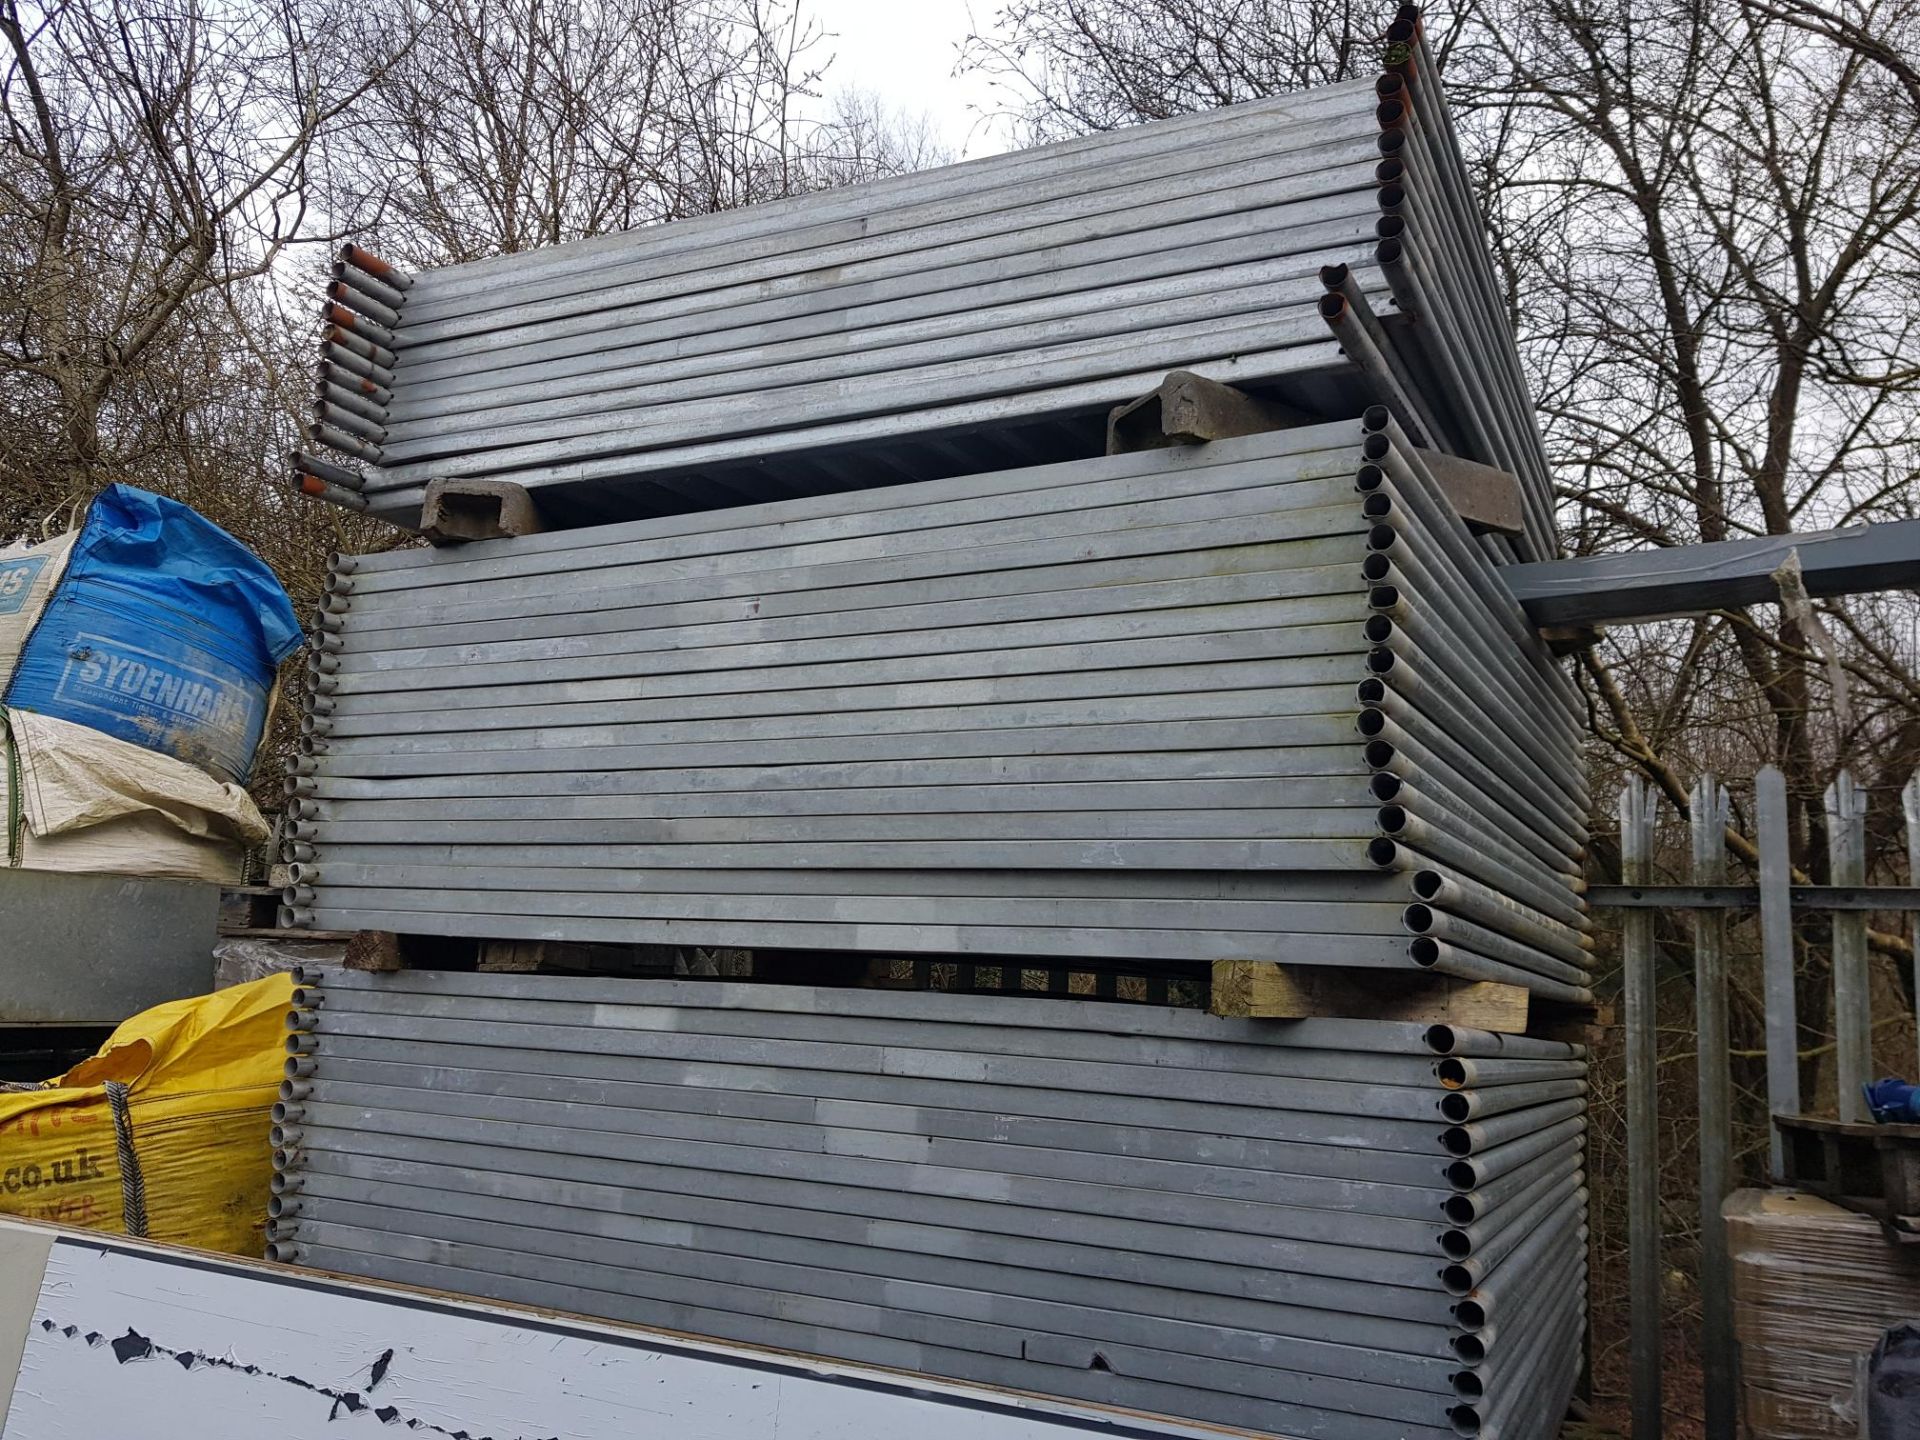 77 x Steel Hoarding Temporary Site Fencing Panels Galvanised (size: approx. 2.1m x 2.0m high) No - Image 2 of 3